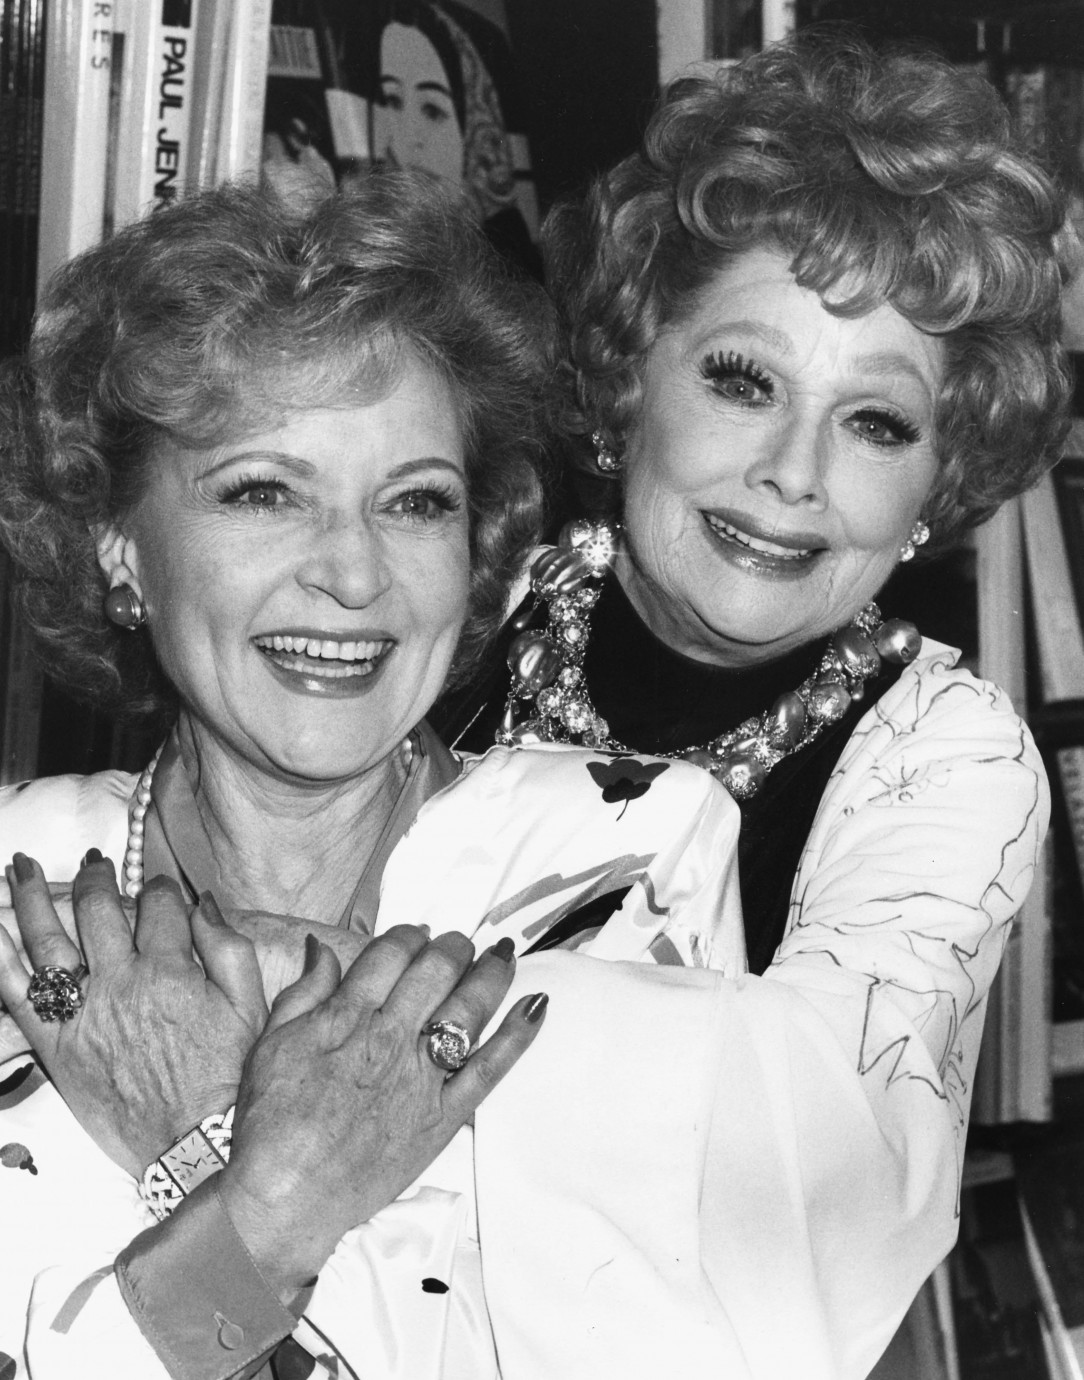 Betty White with Lucille Ball at a book signing event in Los Angeles, October 2nd 1987